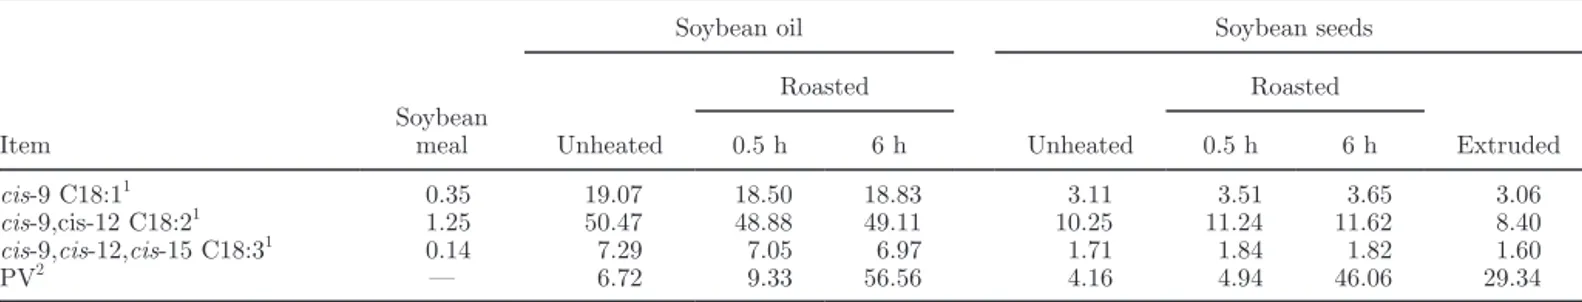 Table 1. Unsaturated FA content (g/100 g) and peroxide values (PV; mEq/kg of fat) of soybean meal, soybean oils, and soybean seeds 